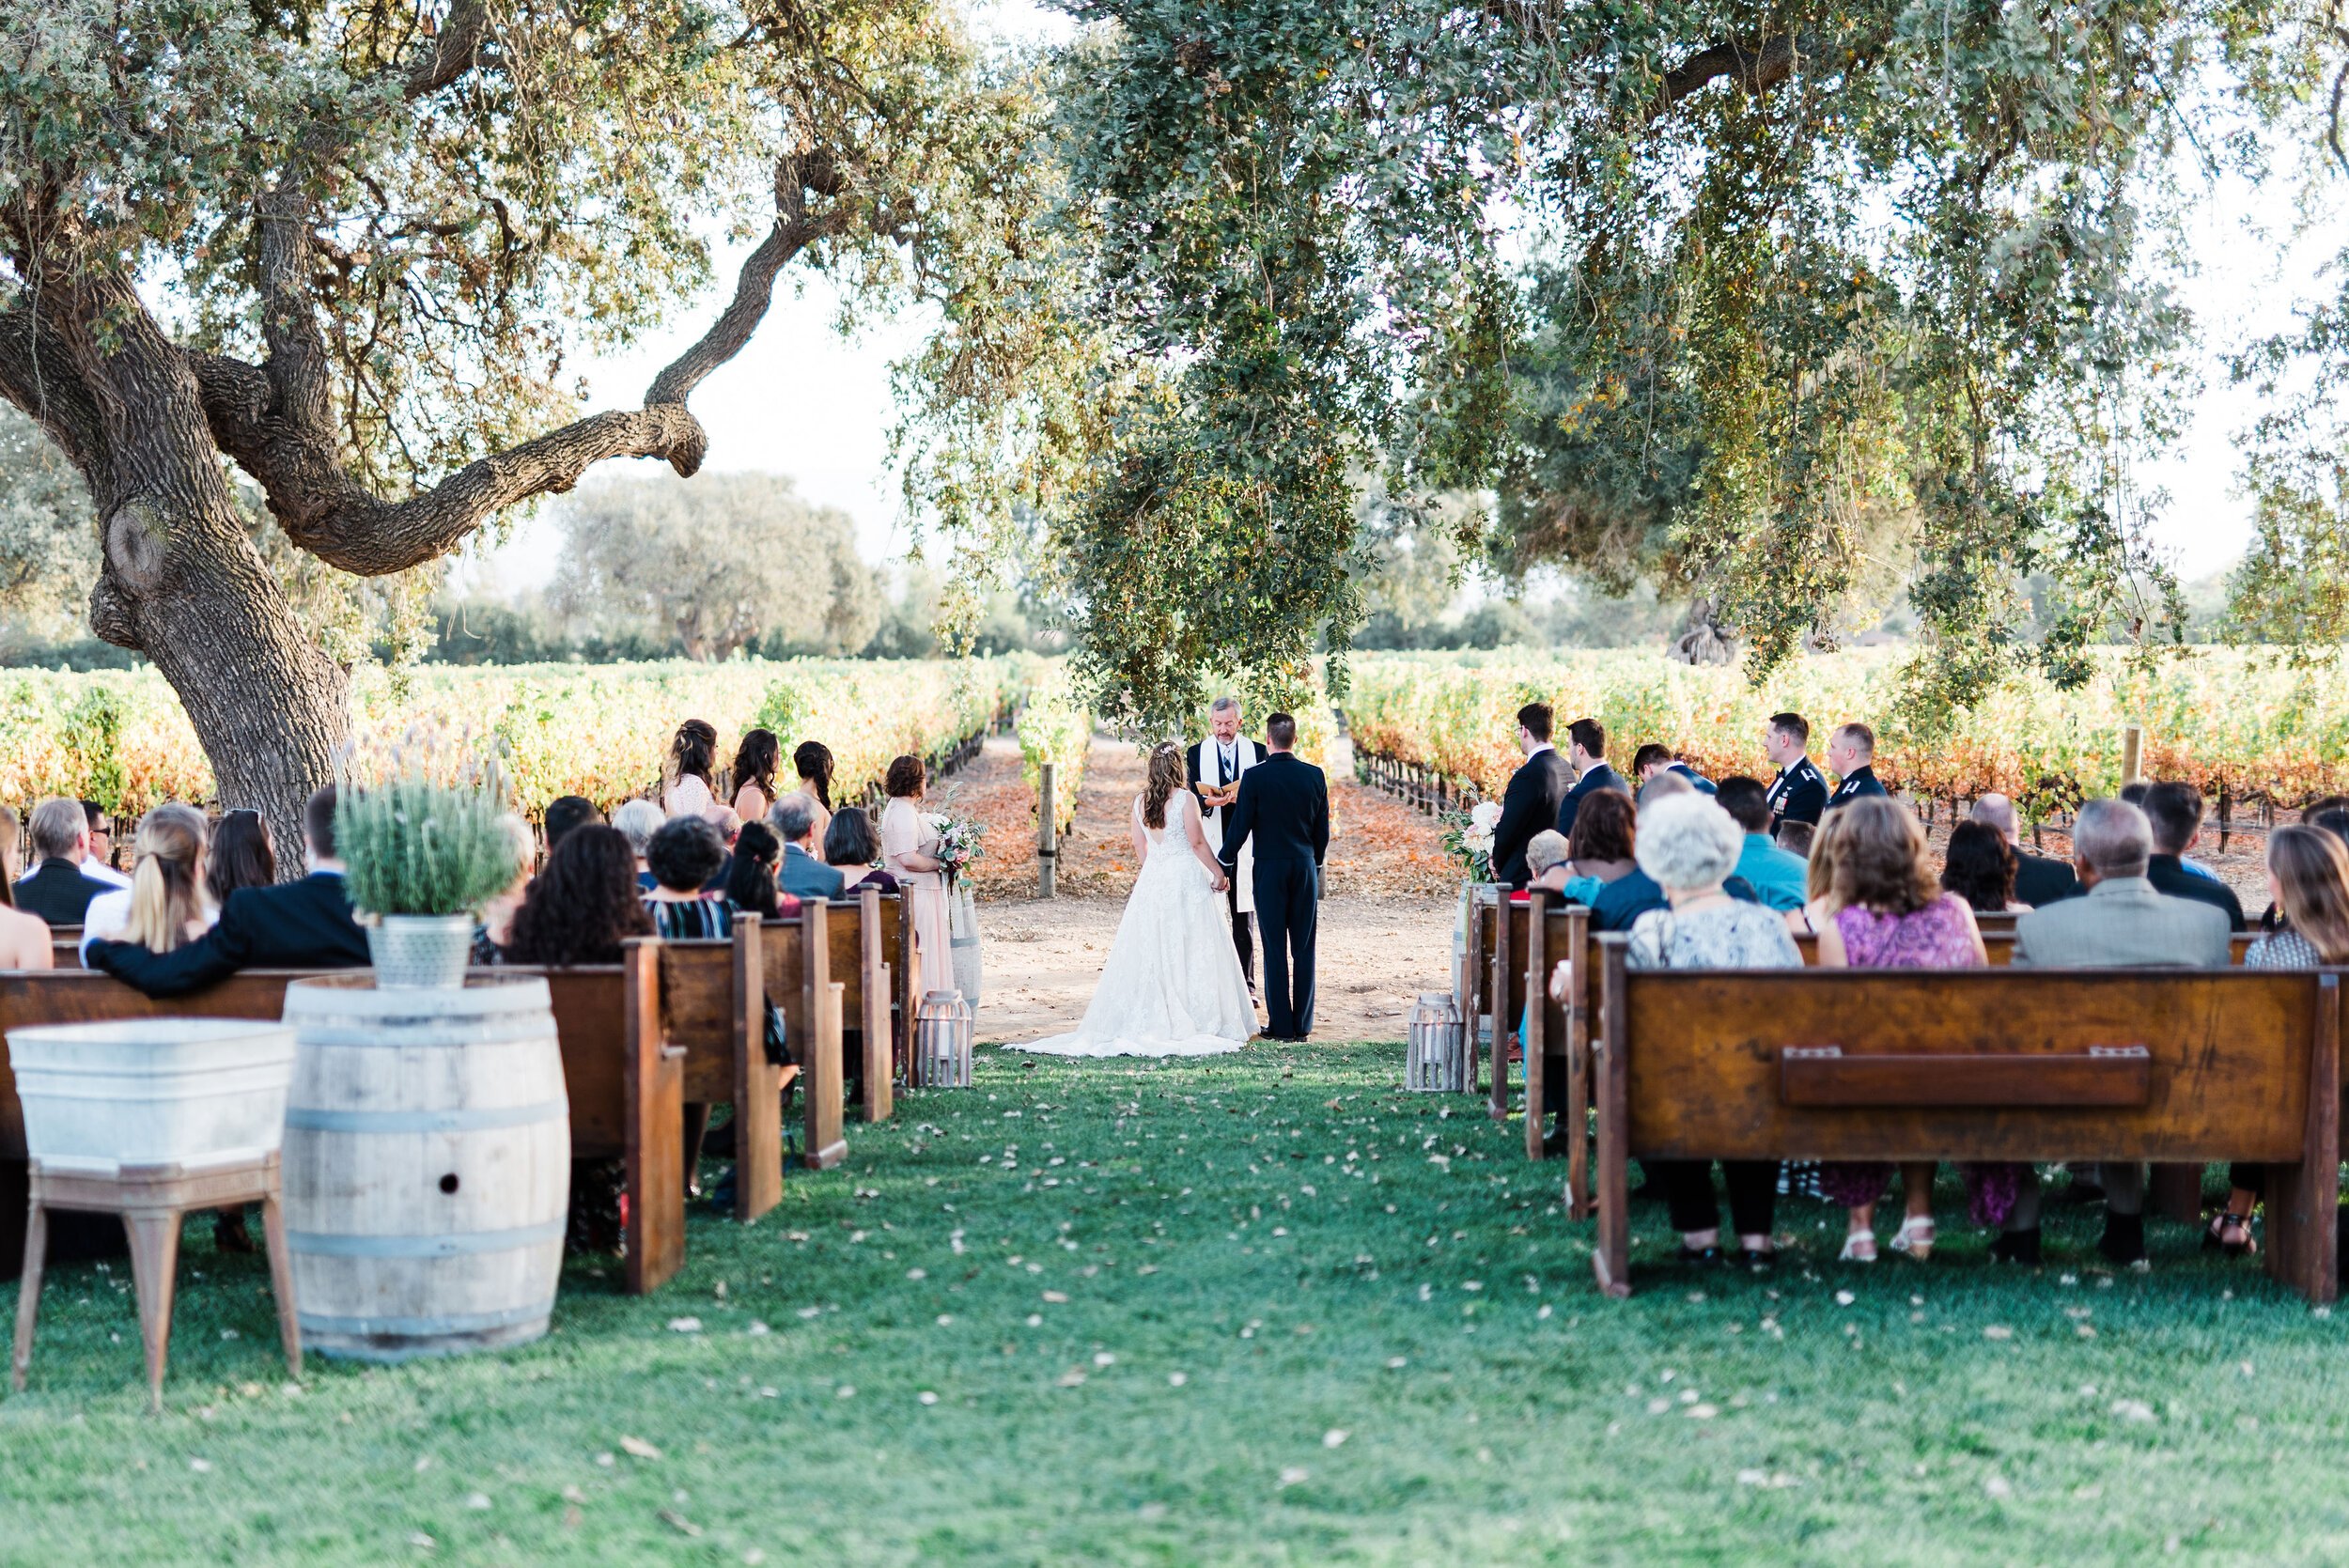 www.santabarbarawedding.com | Roblar Winery and Farm | Brittany Taylor Photography | Ceremony with a View of the Vineyard